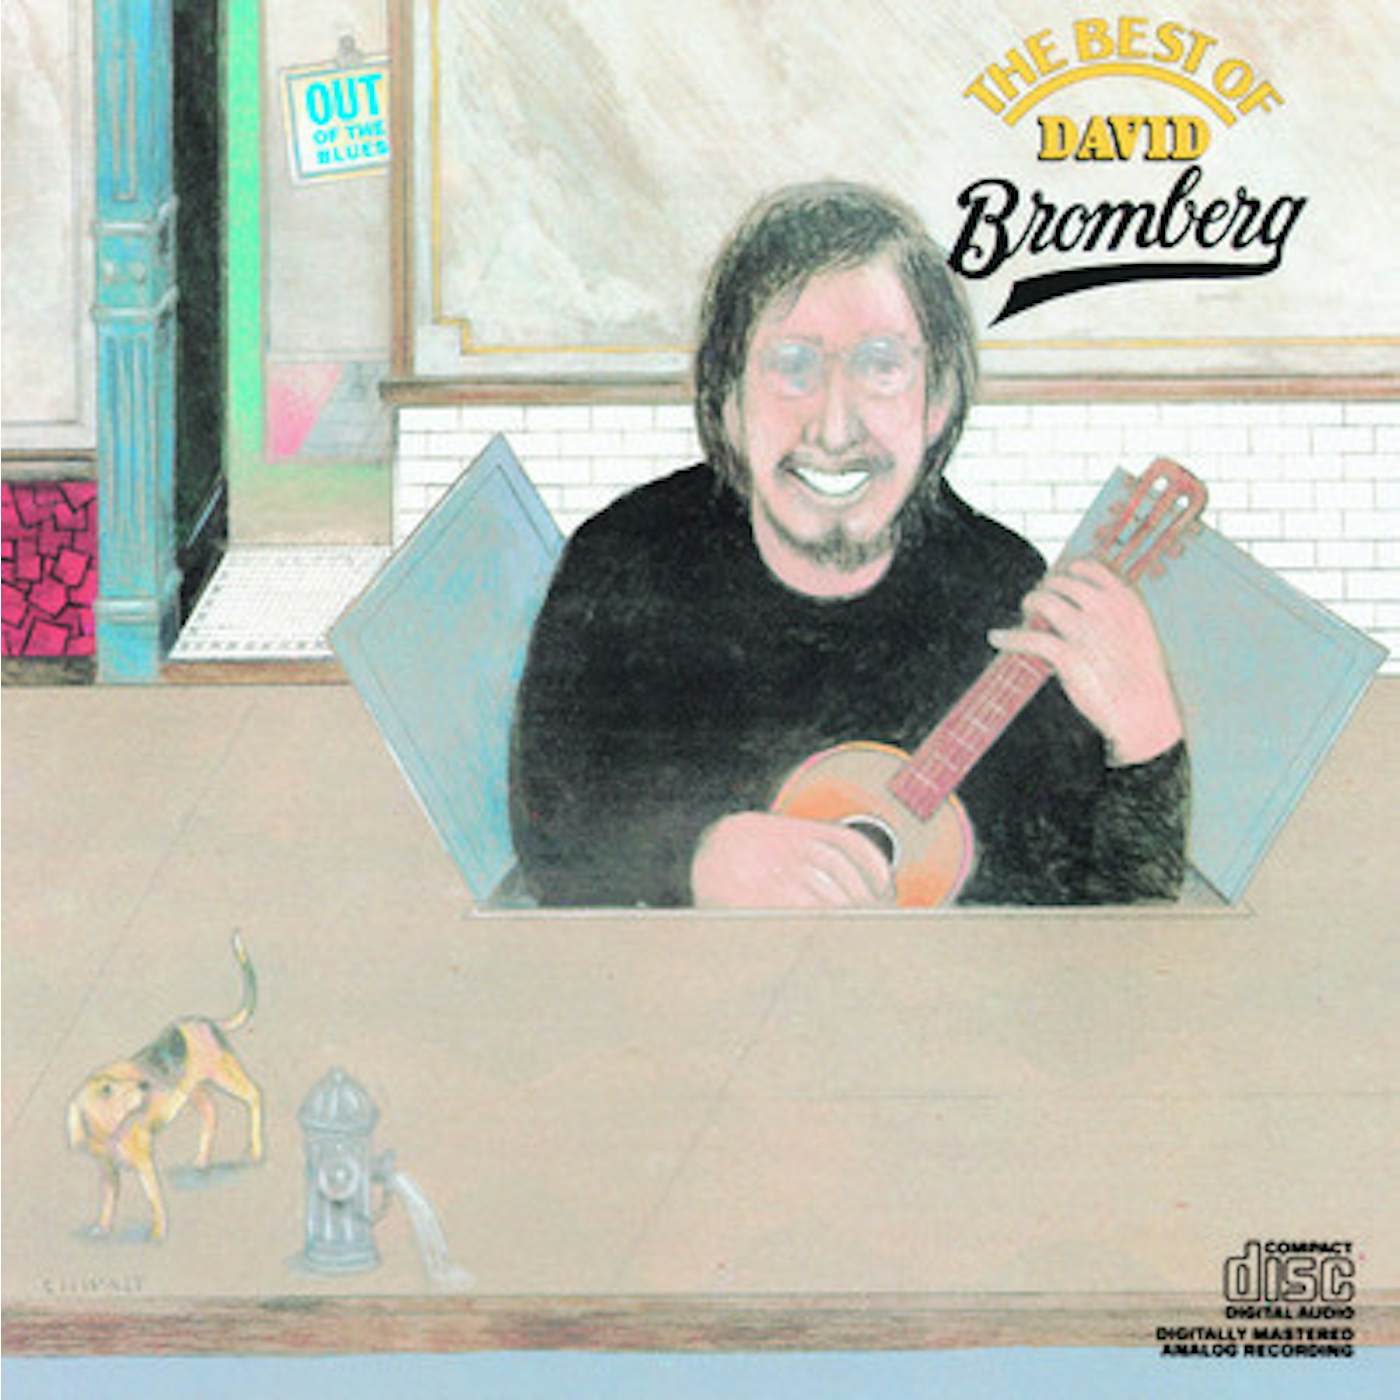 David Bromberg BEST OF: OUT OF THE BLUE CD